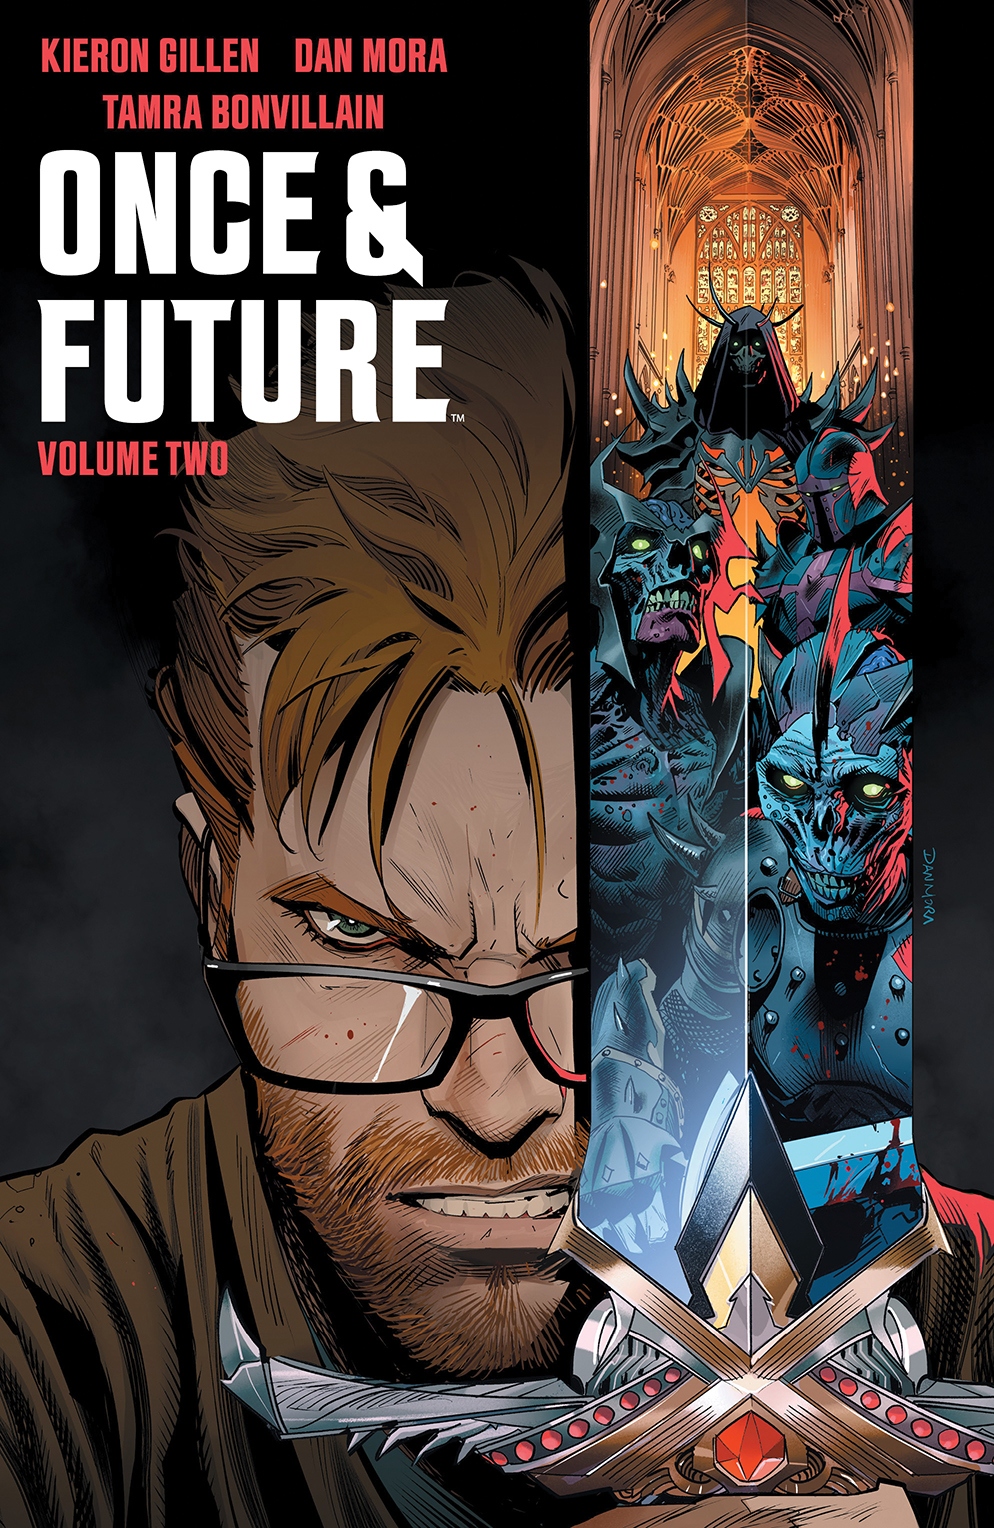 ONCE & FUTURE TP VOL 02